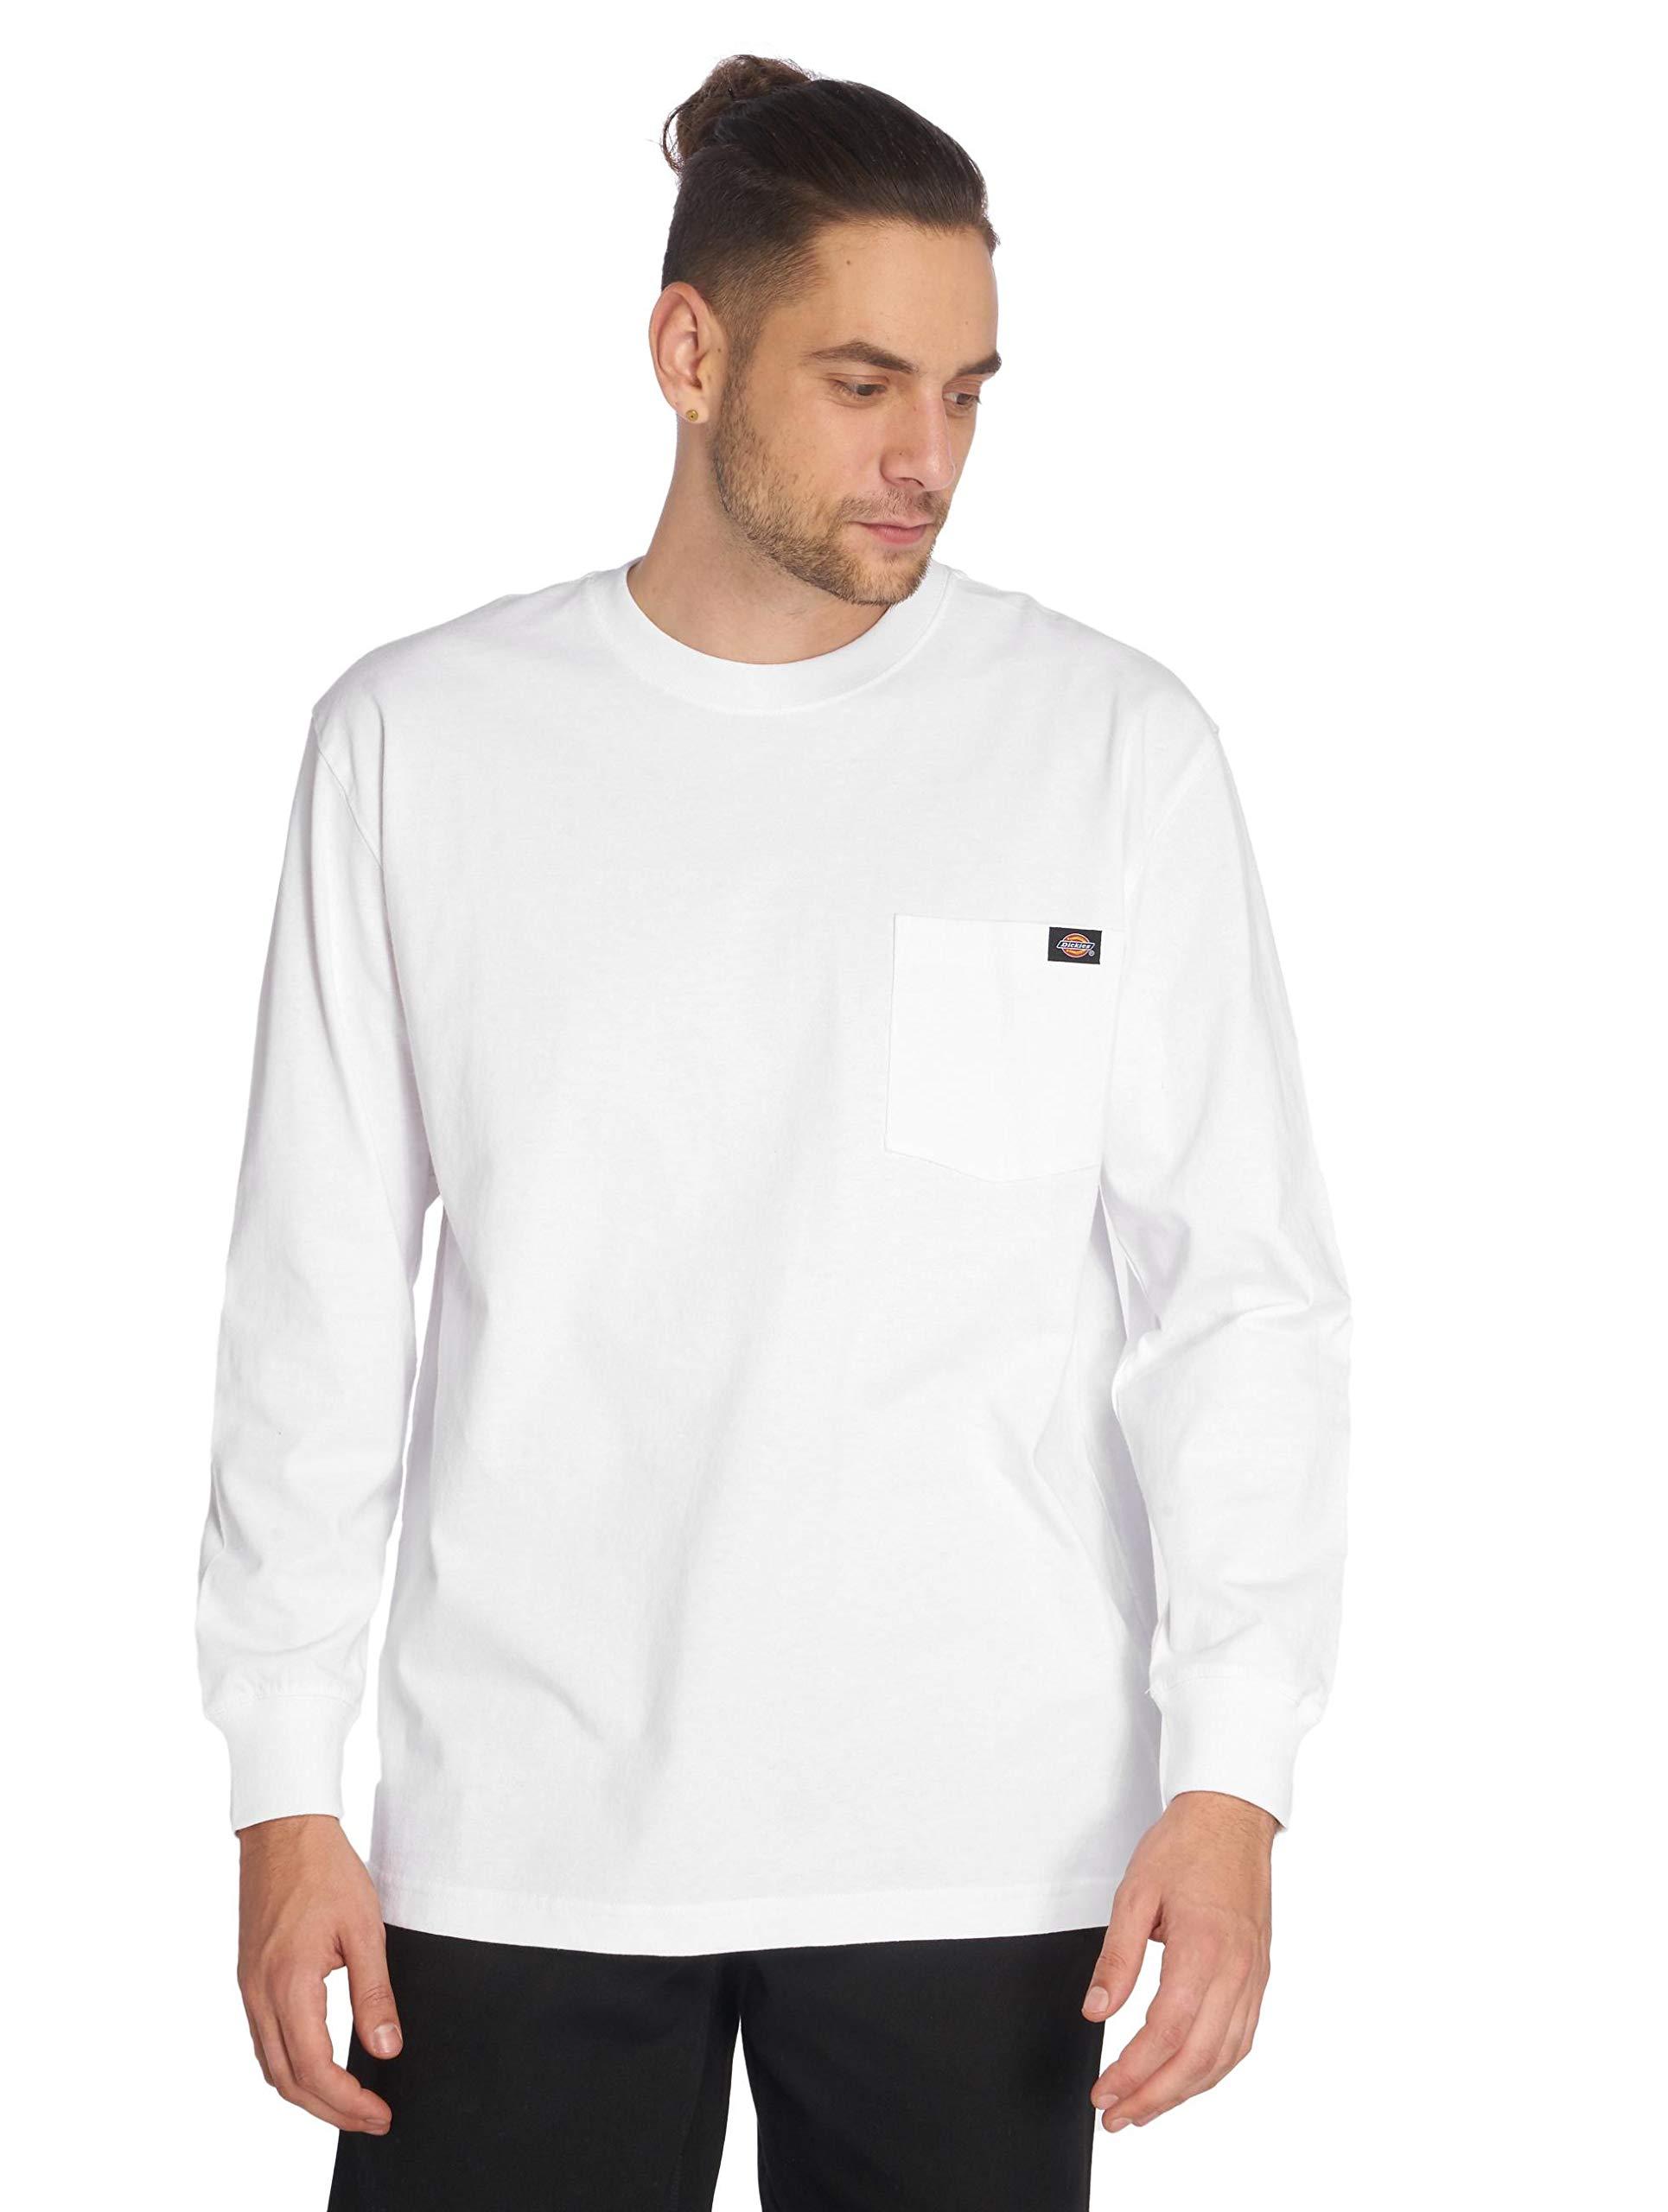 Dickies Long Sleeve Heavyweight Crew in | Men for Lyst White Neck